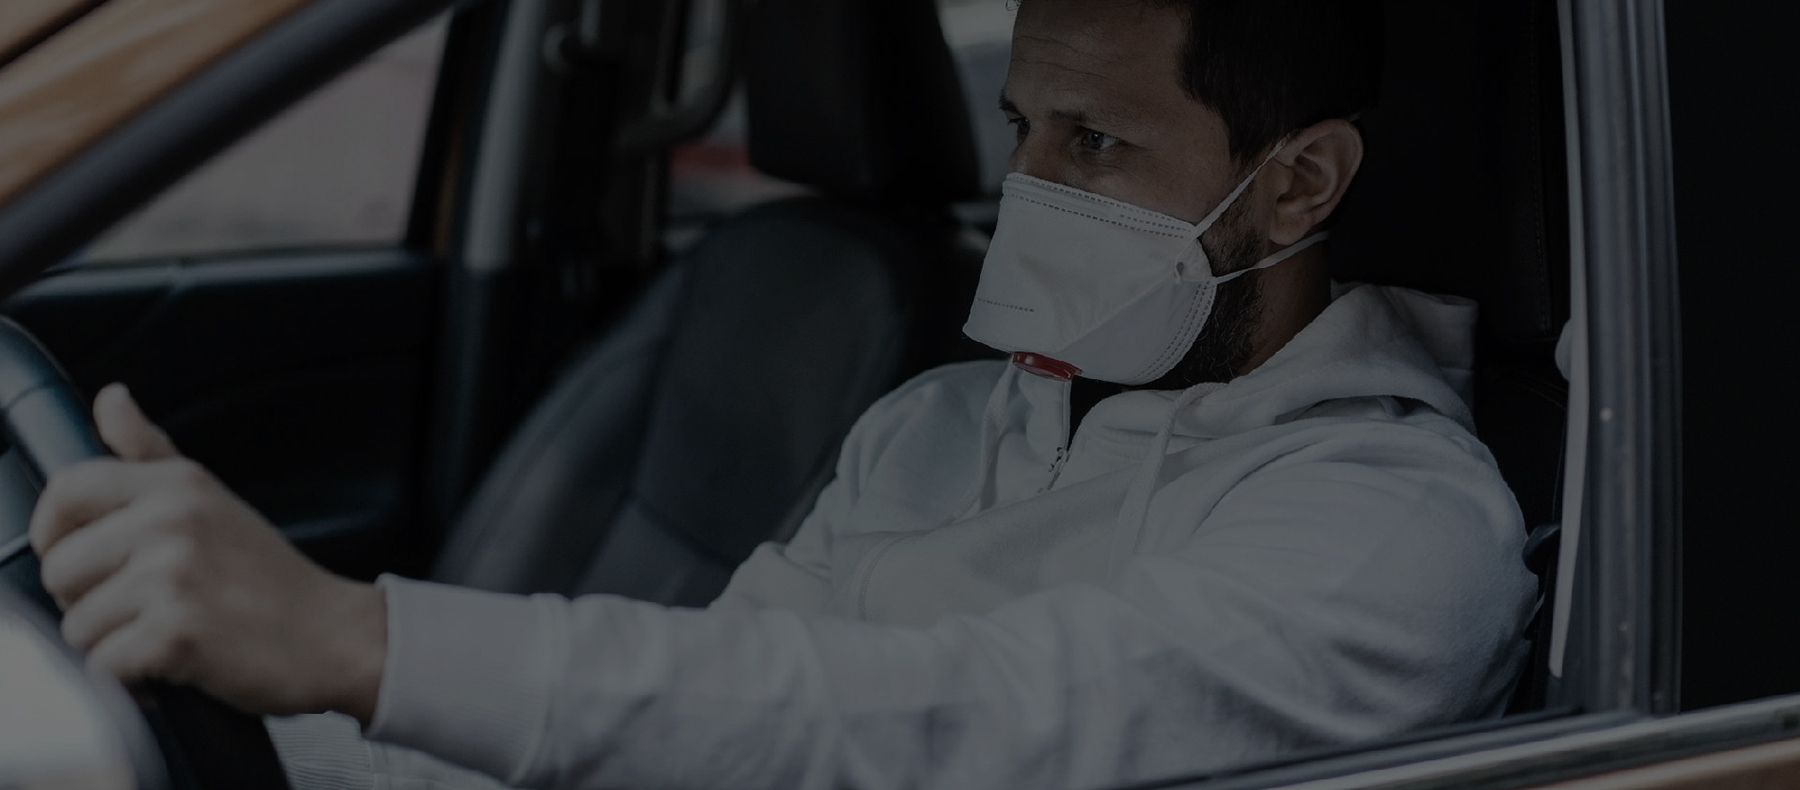 Man wearing a mask while driving alone in his car